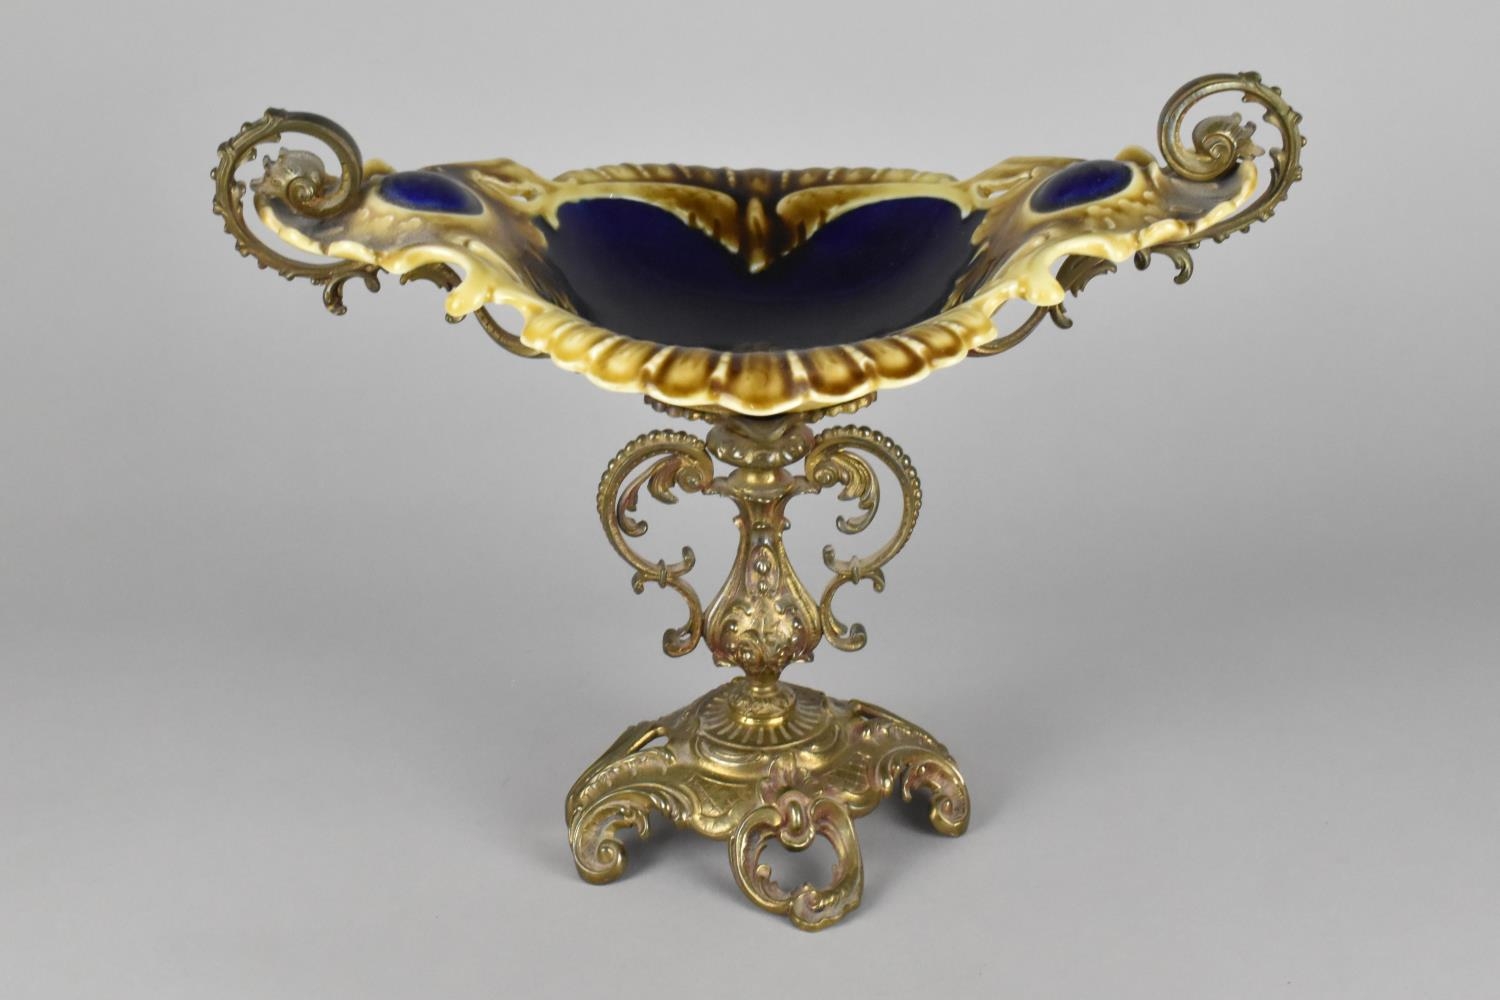 A Majolica and Gilt Metal Centrepiece, the Majolica Bowl of Shaped Form Supported on Scrolled Gilt - Image 2 of 2